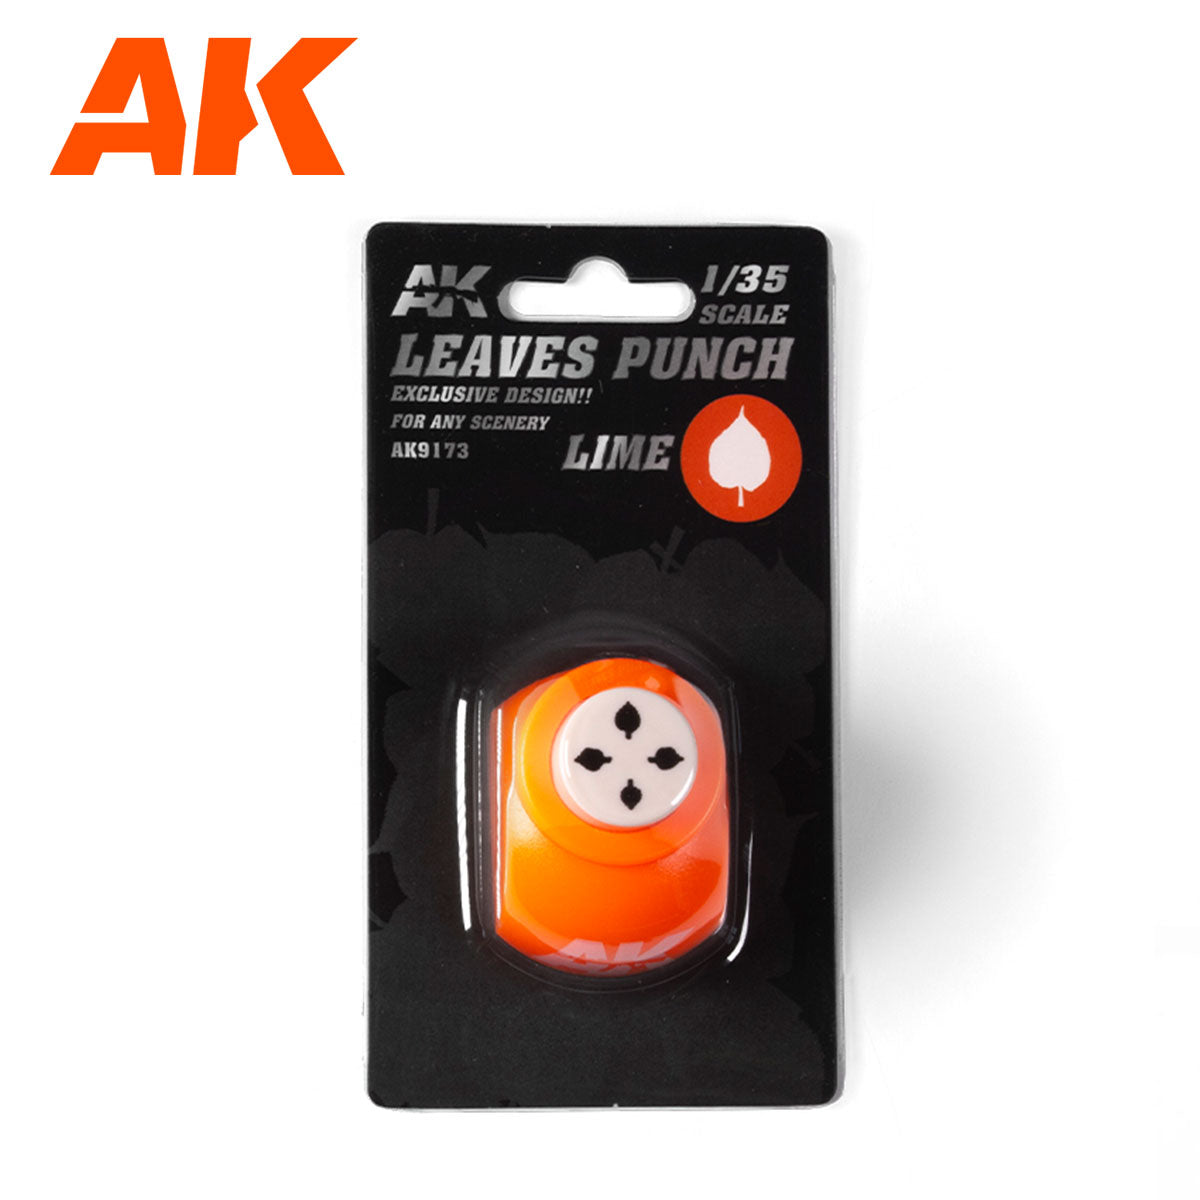 AK9173 - Leaves Punch - Lime (1:35/1:32/54mm)